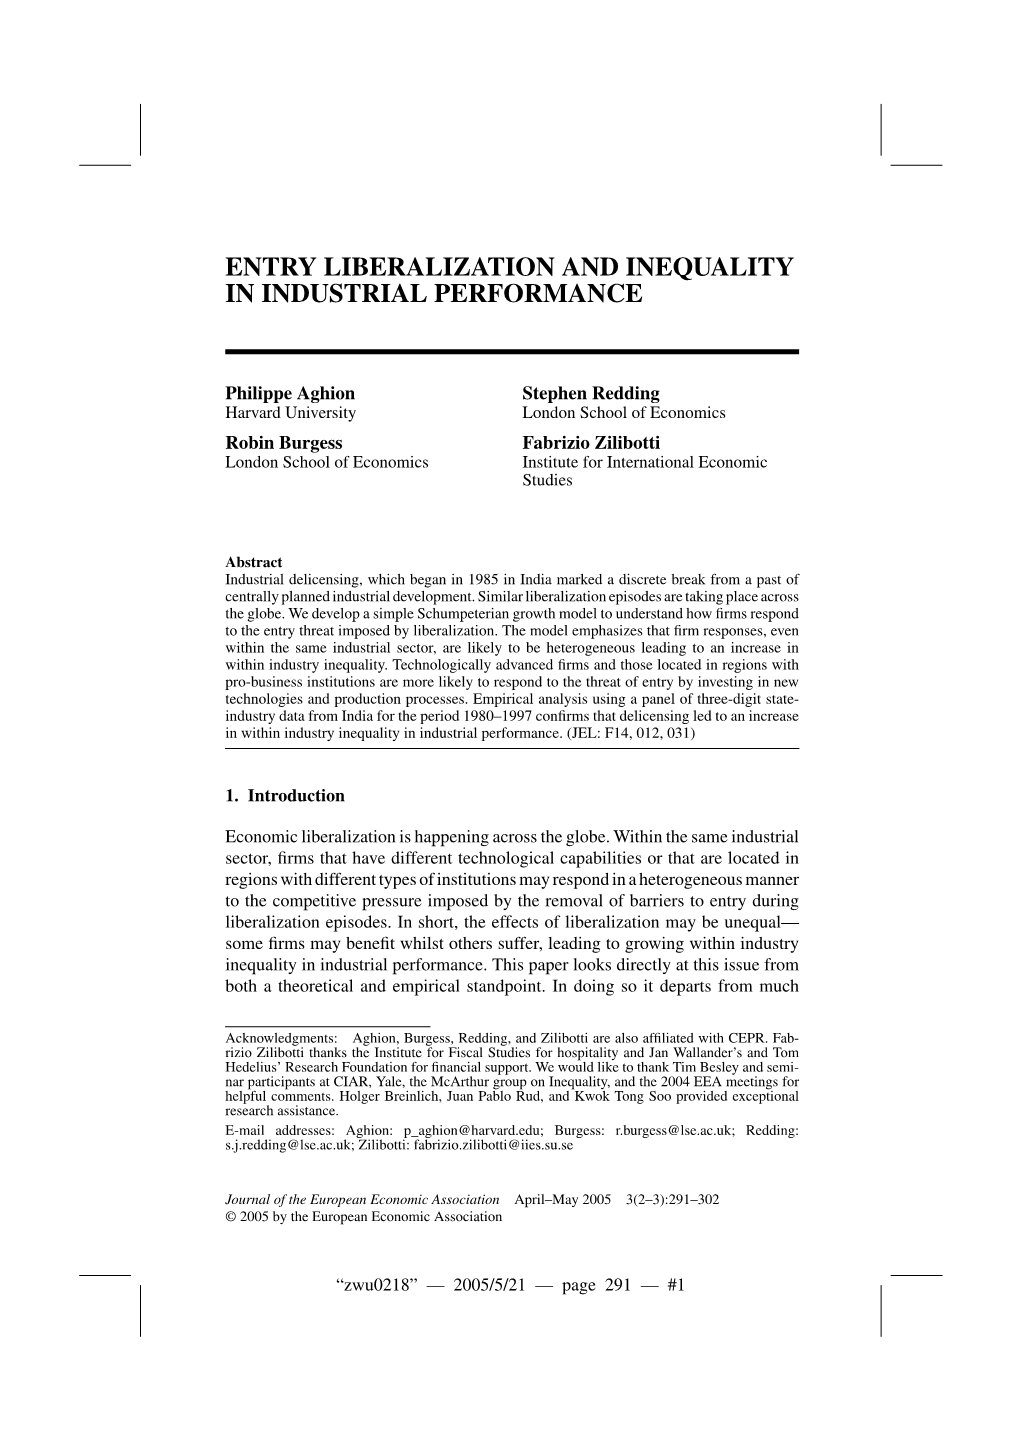 Entry Liberalization and Inequality in Industrial Performance